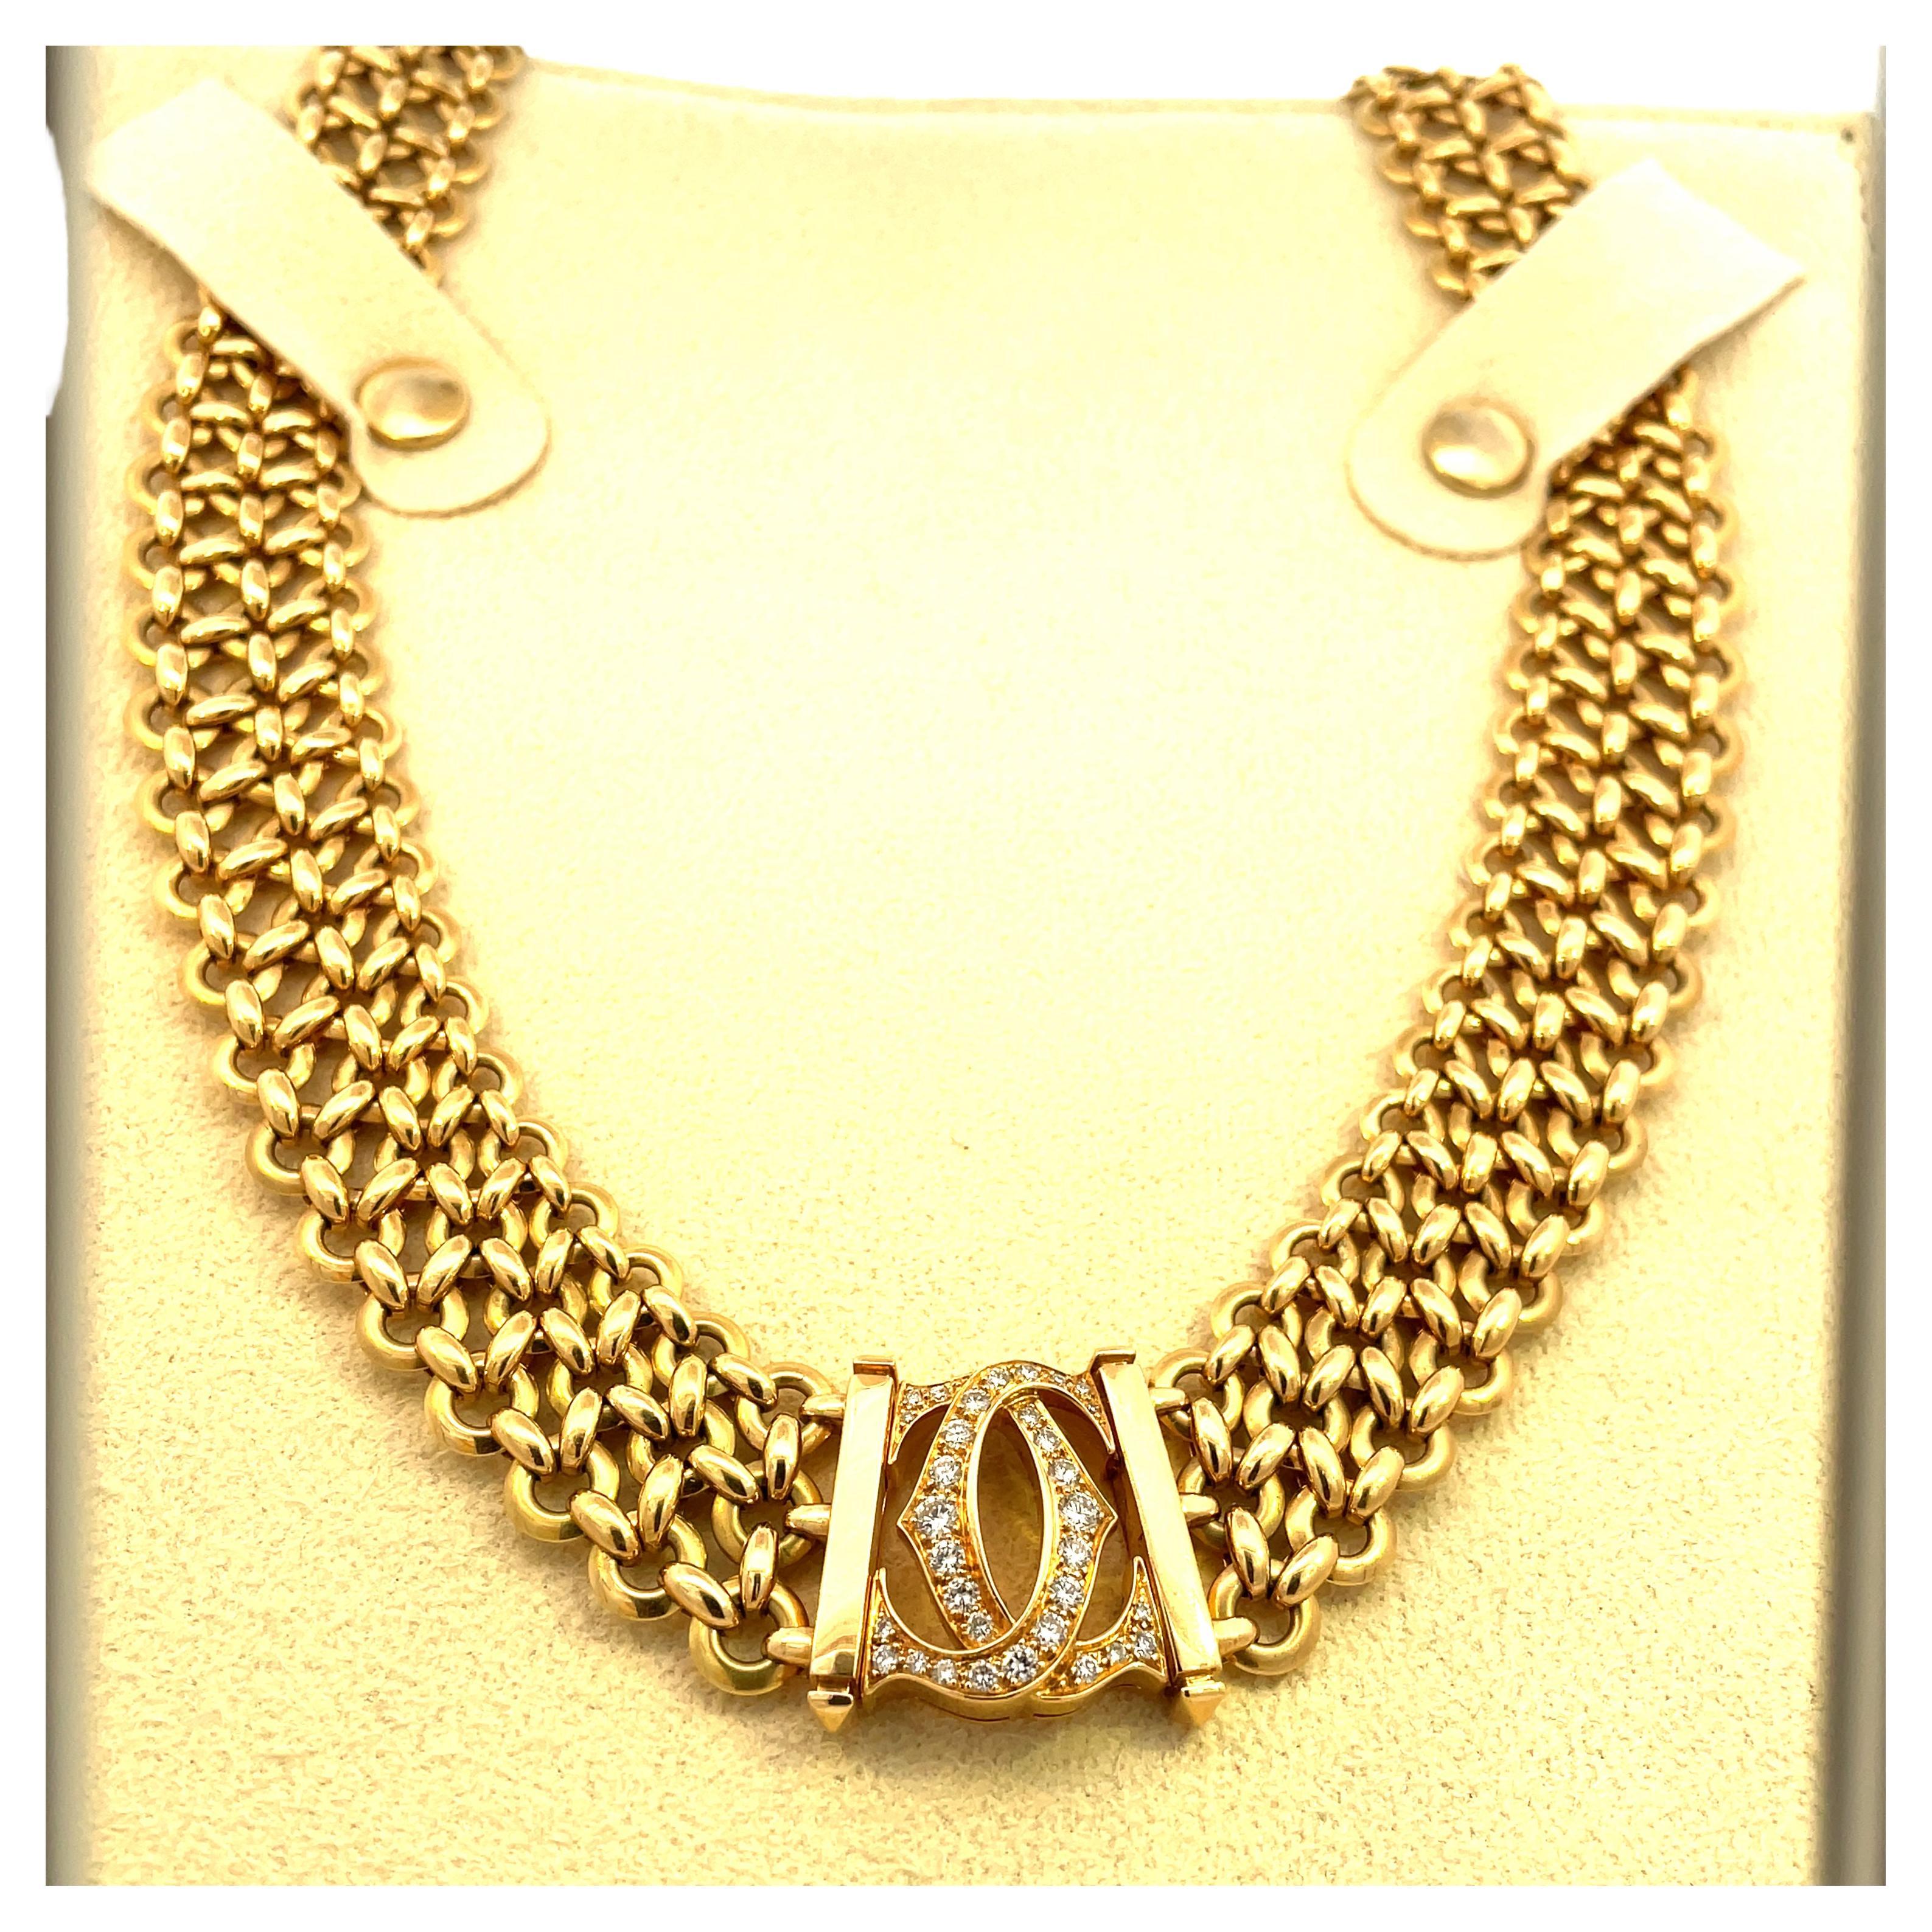 Cartier hindu diamond Necklace 750(WG) 4.8g｜a2492376｜ALLU UK｜The Home of  Pre-Loved Luxury Fashion